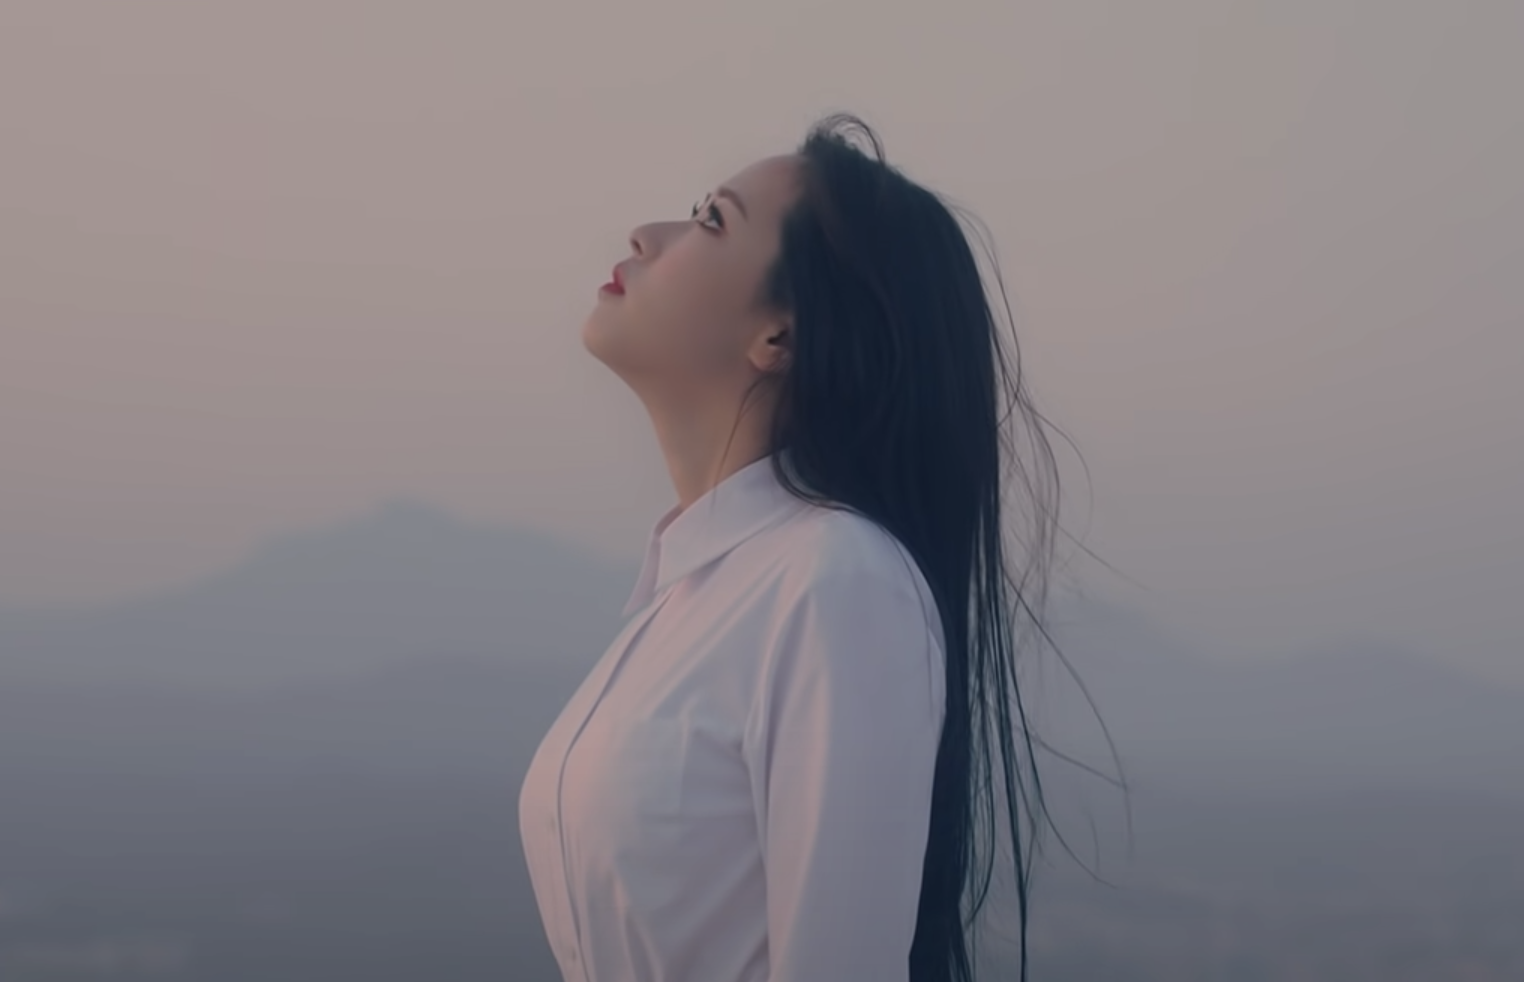 Olivia Hye stands on a rooftop and looks out at the city that surrounds her